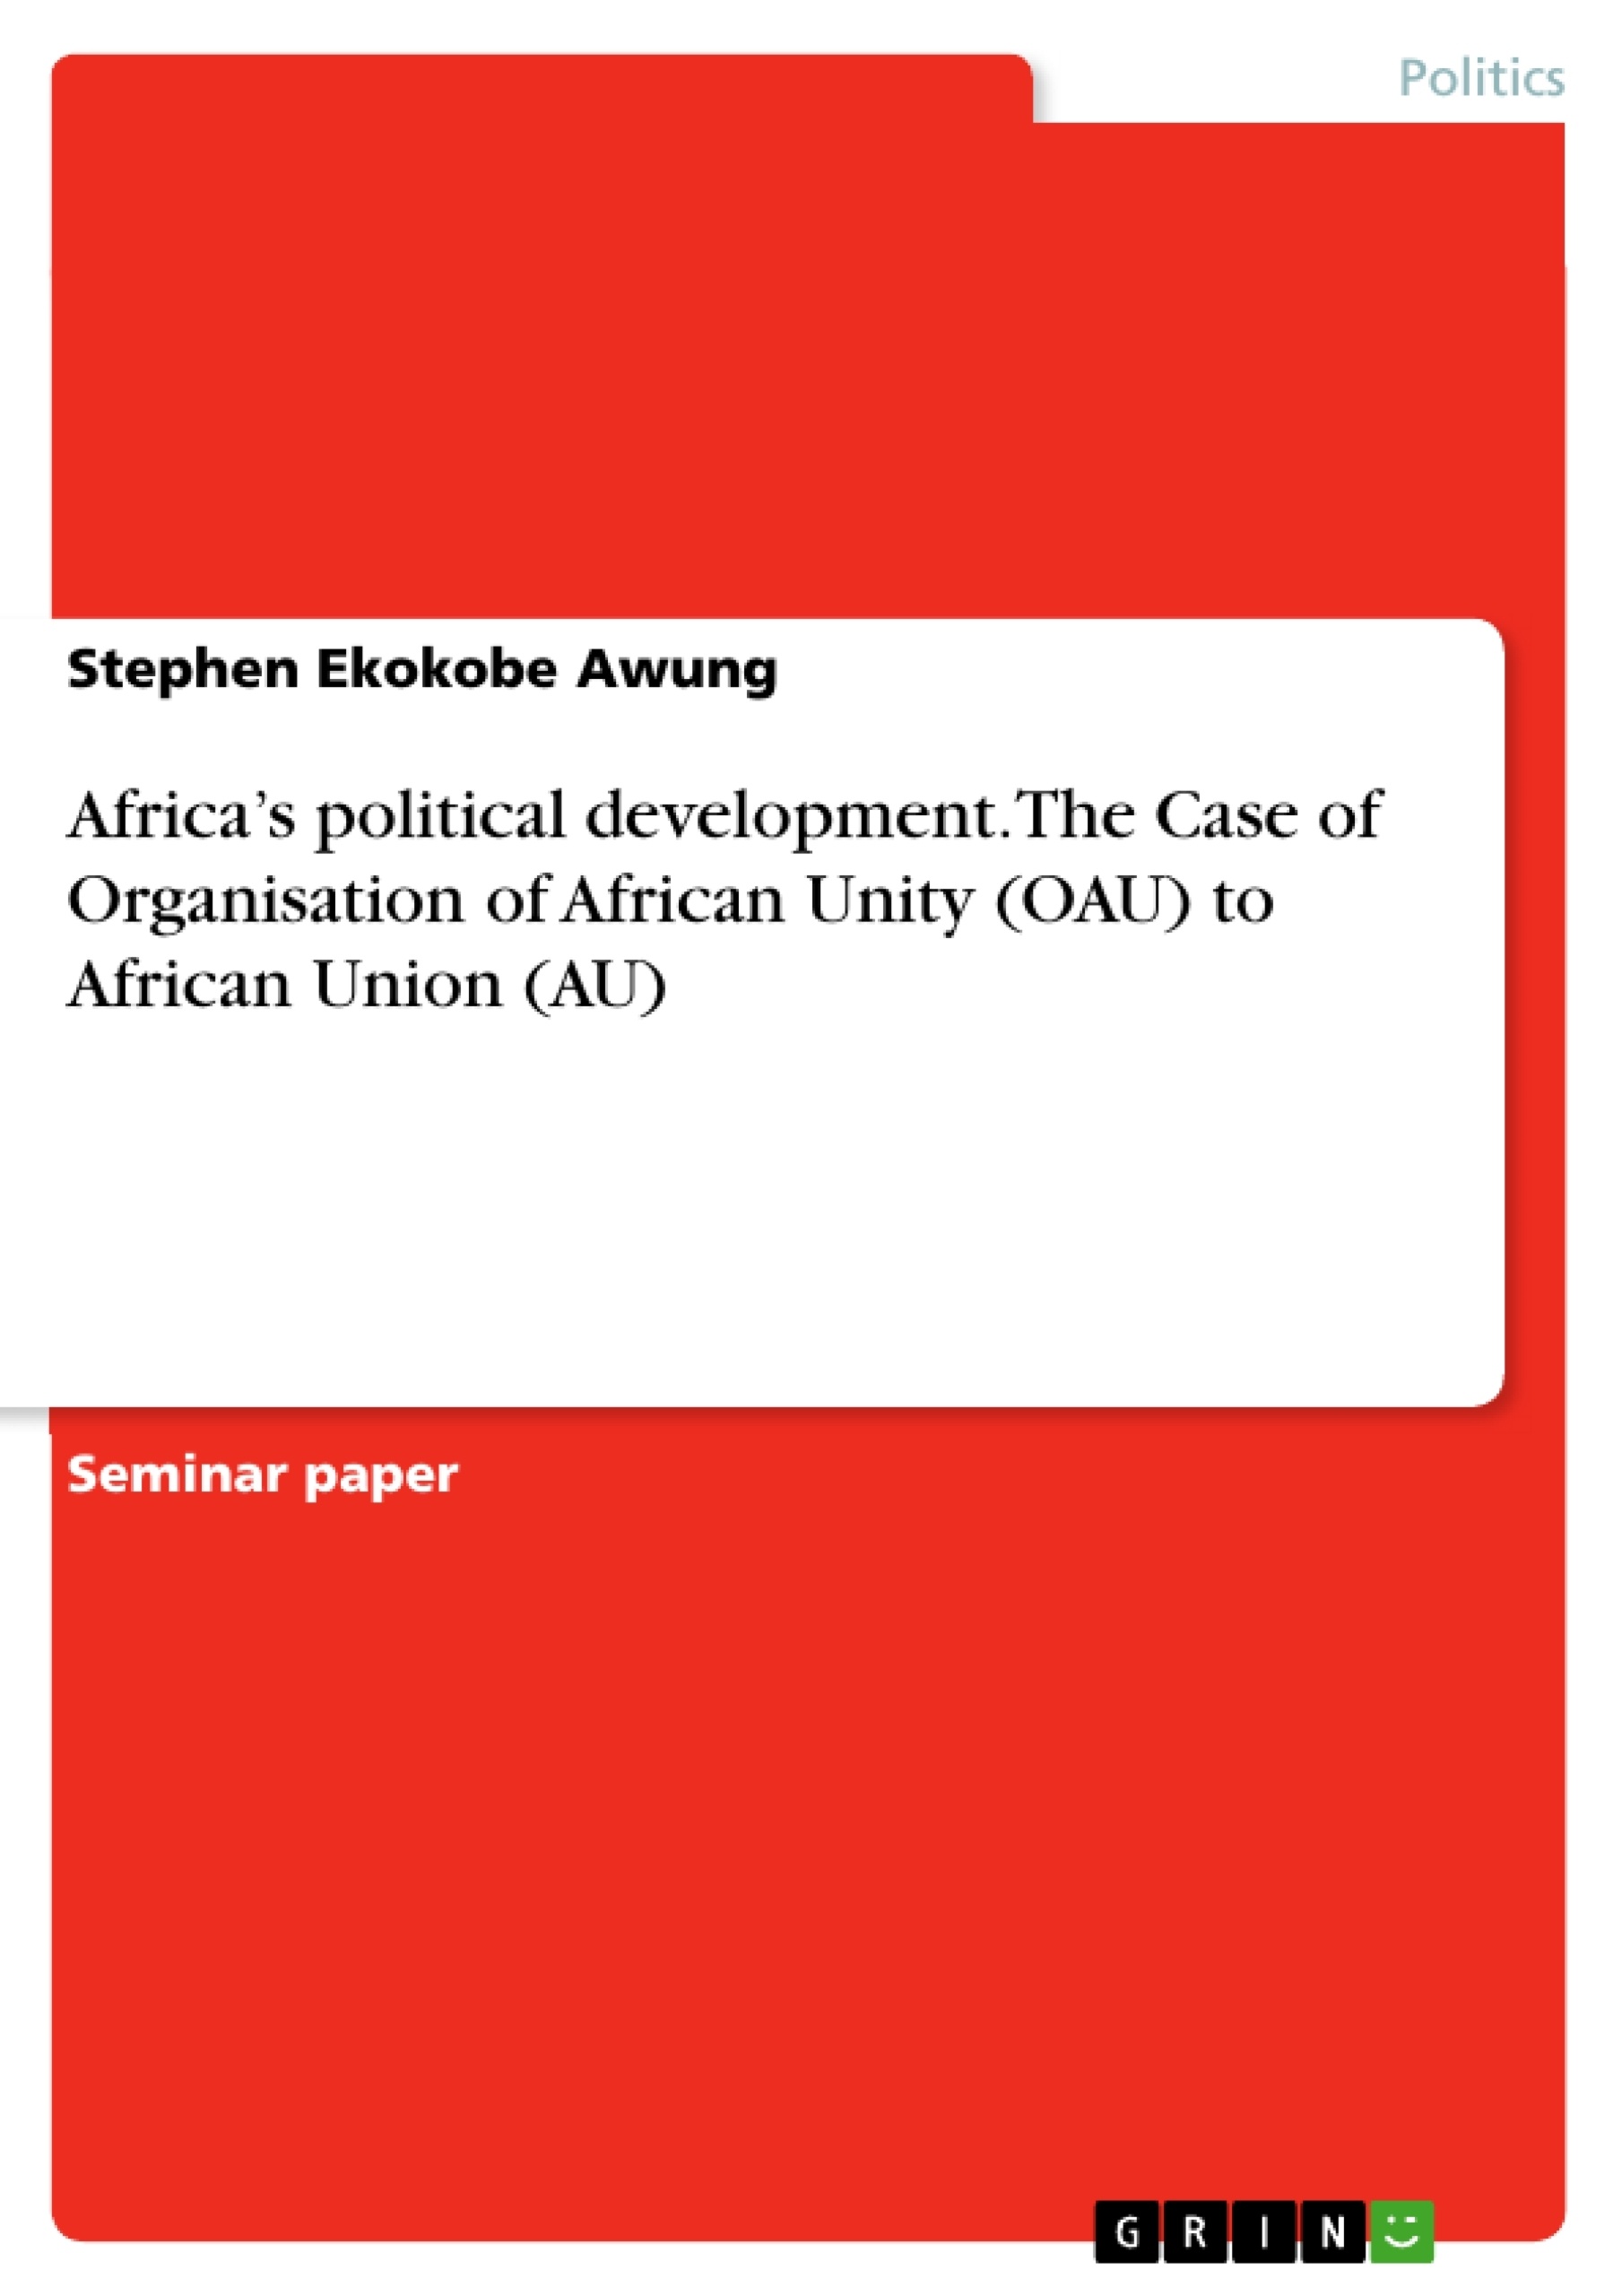 Titre: Africa’s political development. The Case of Organisation of African Unity (OAU) to African Union (AU)